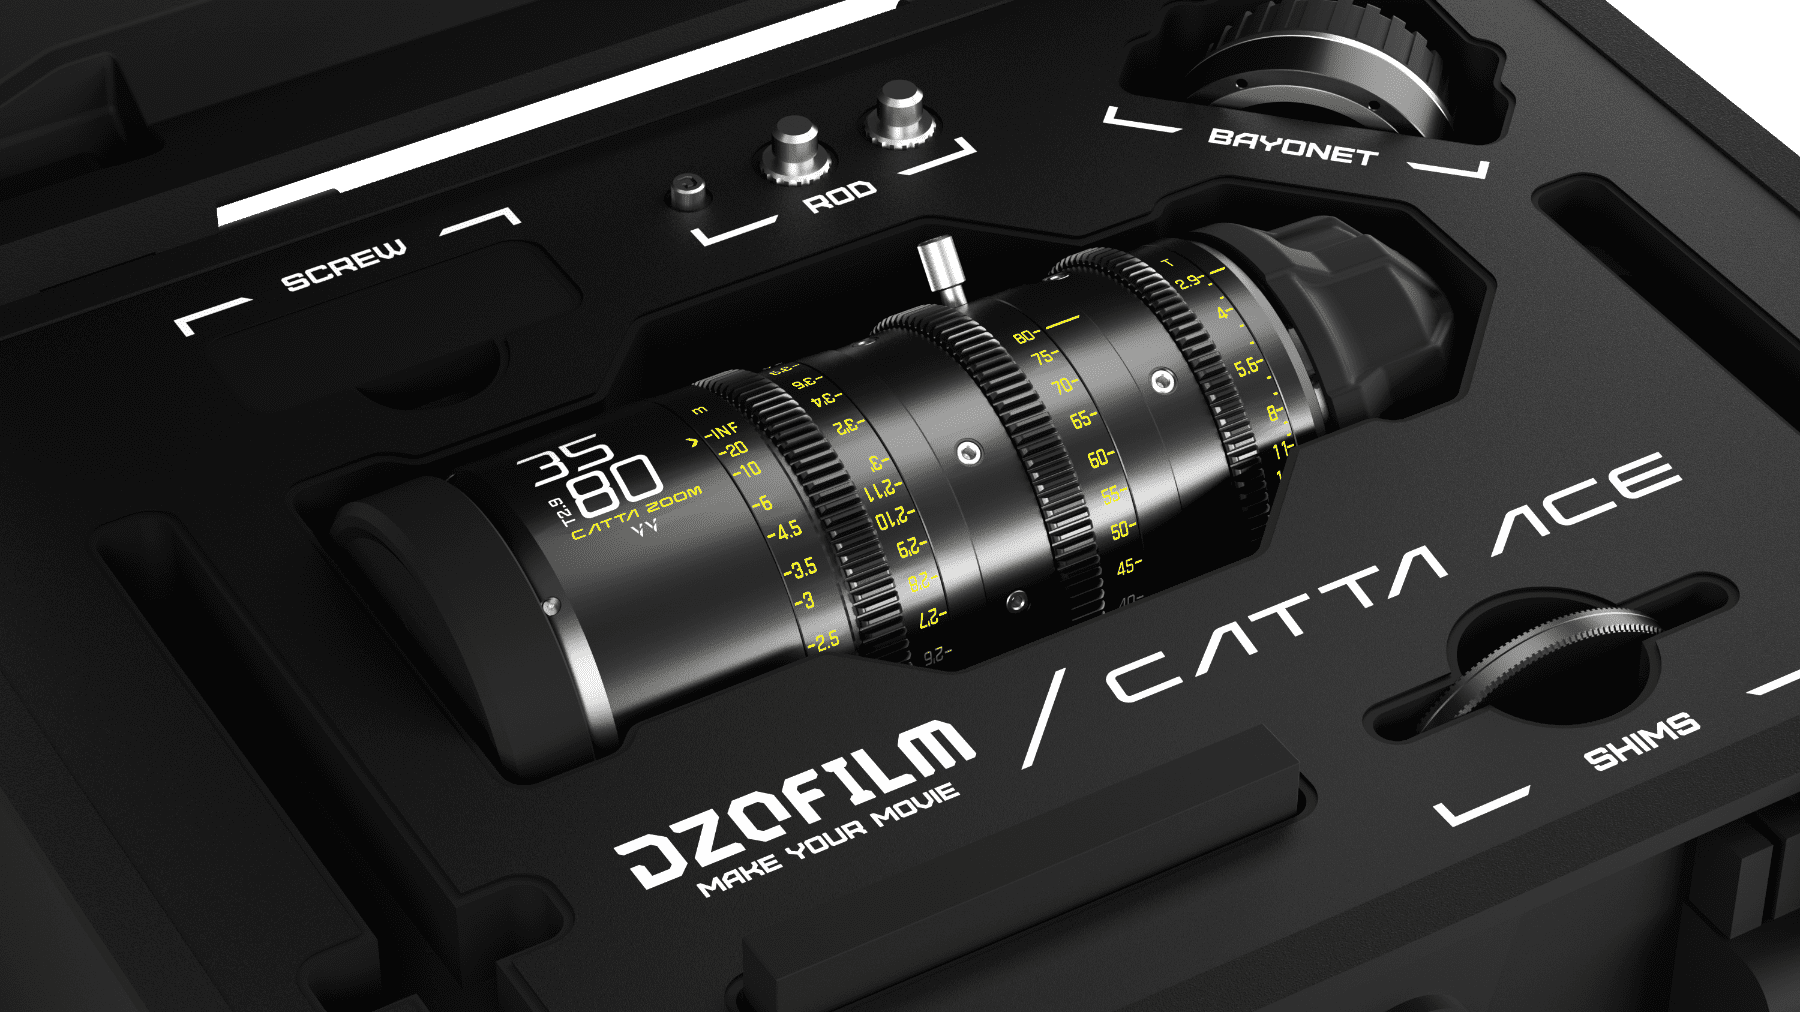 DZOFilm Catta Ace FF Zoom 35-80mm T2.9 PL/EF mount (black metal) with Safety Case